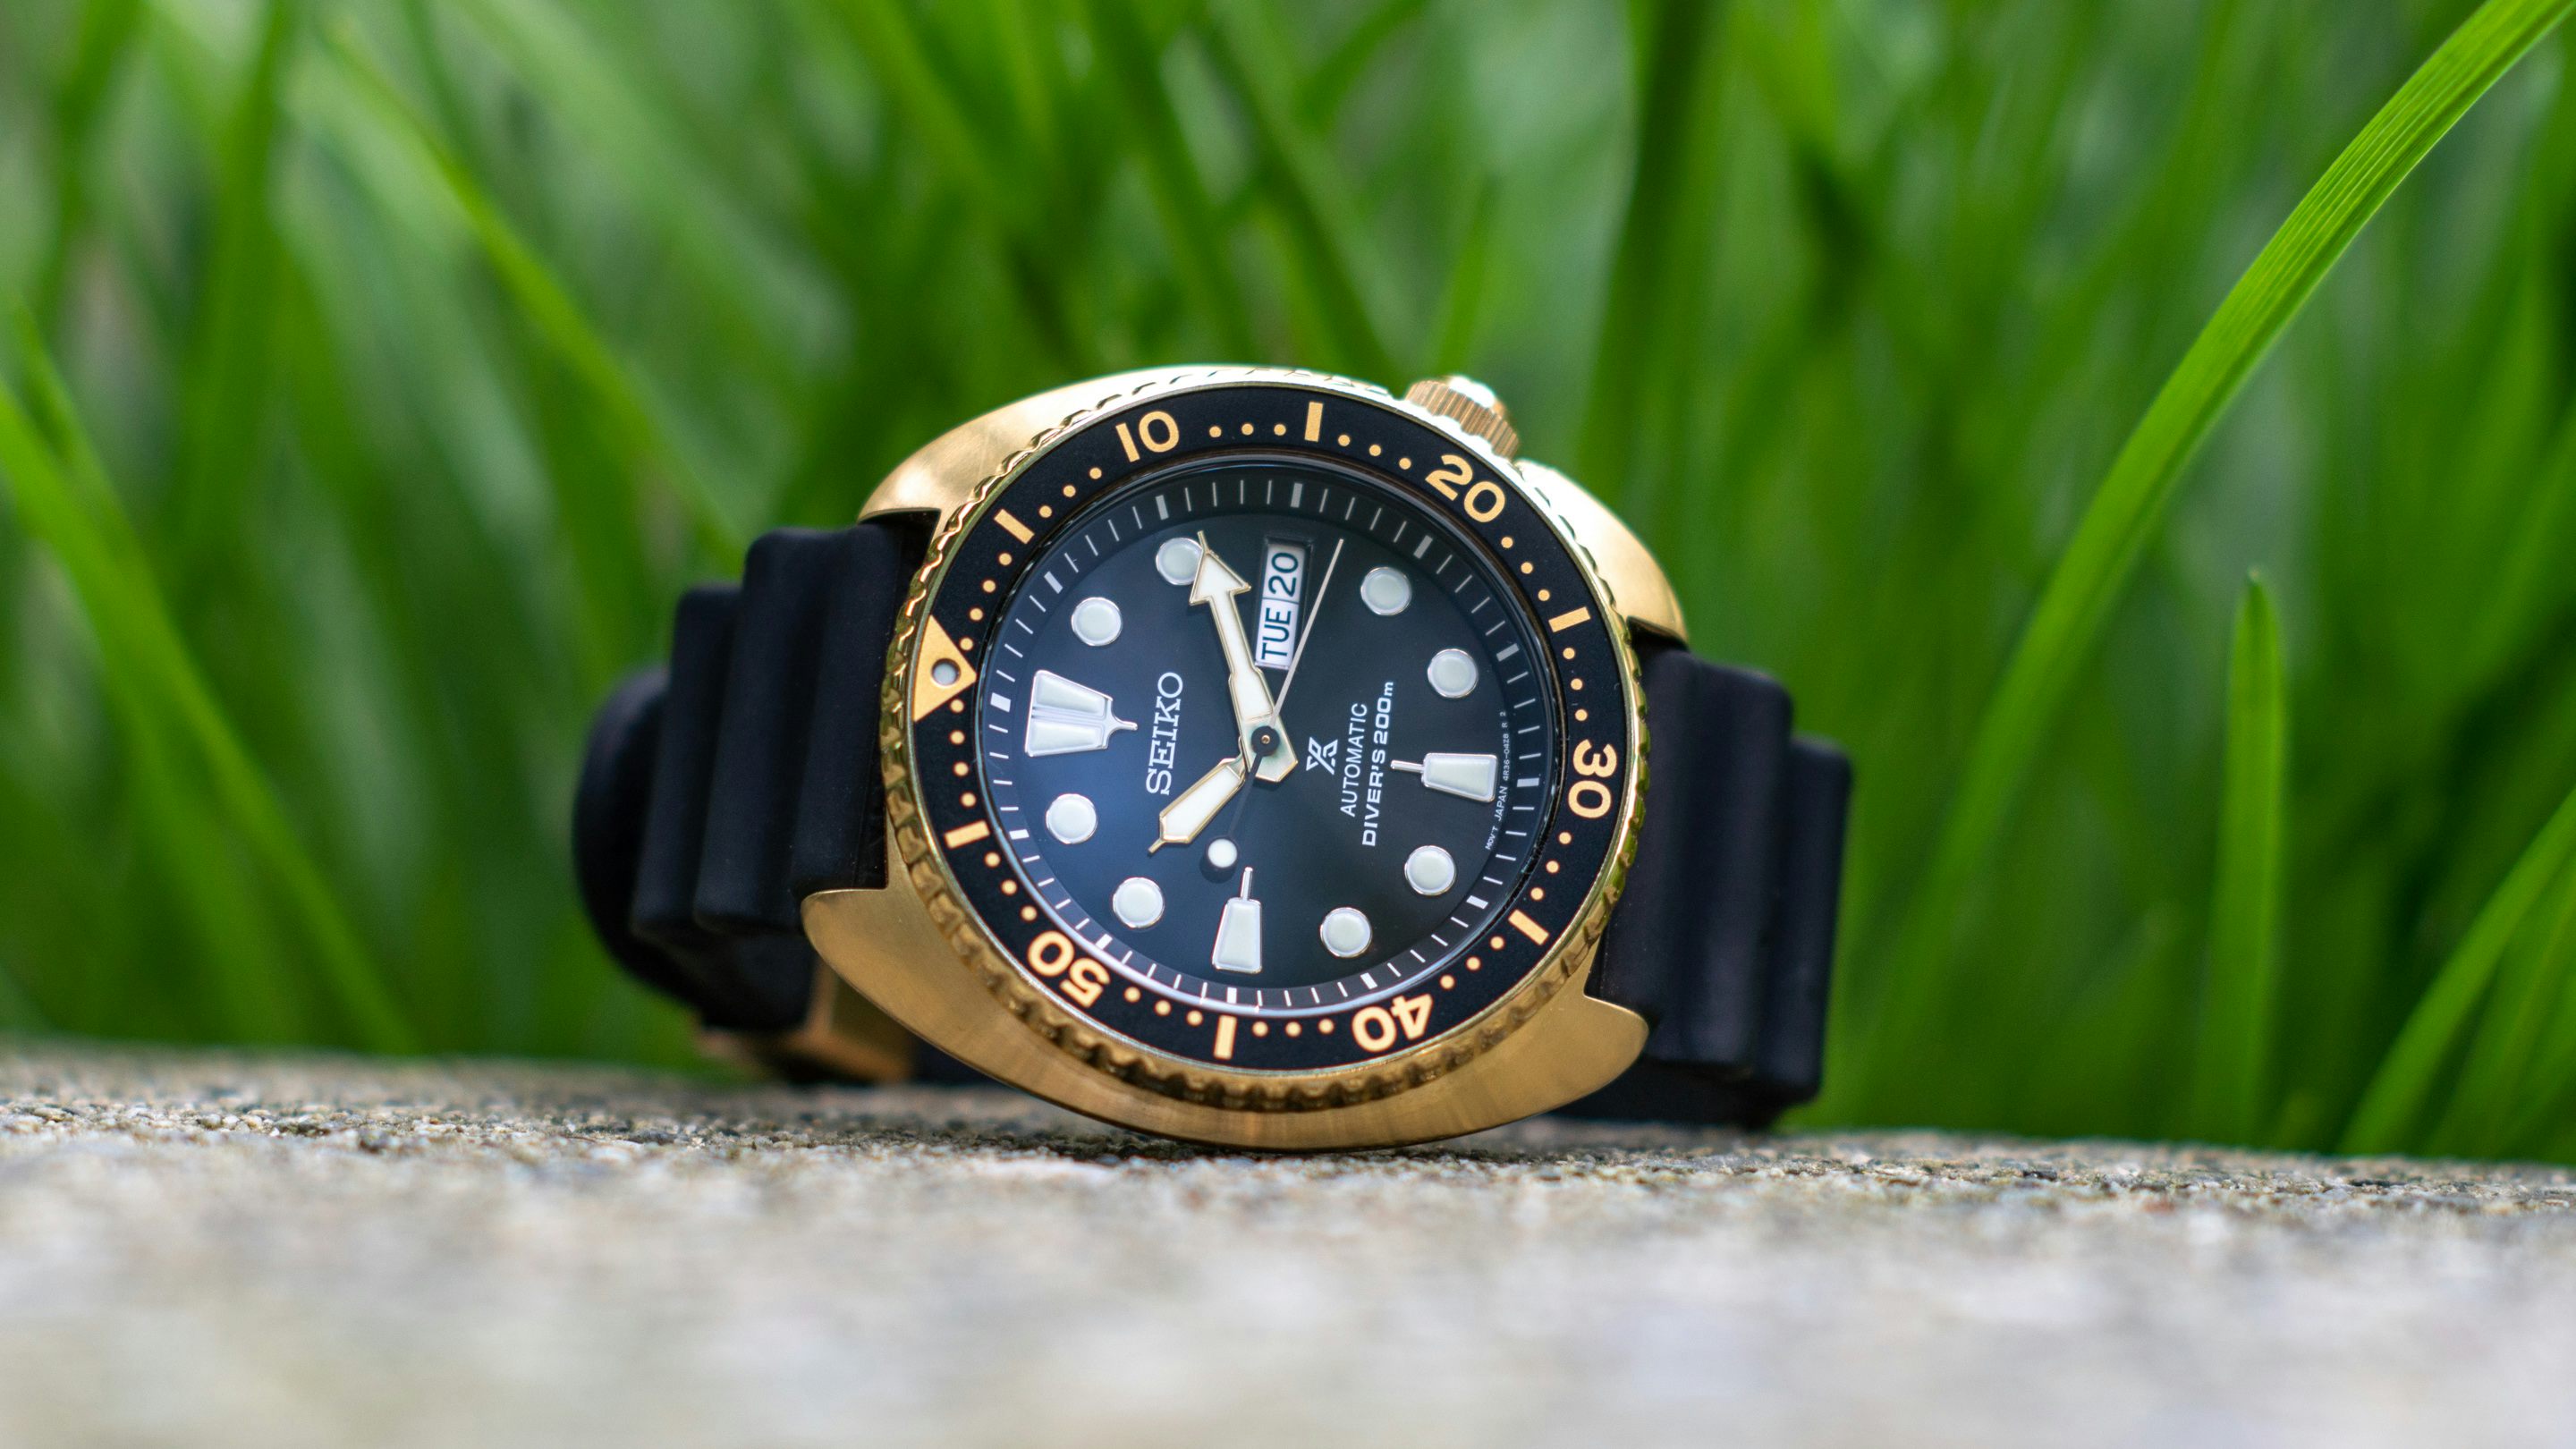 One of Seiko's best dive designs, now with more gold.